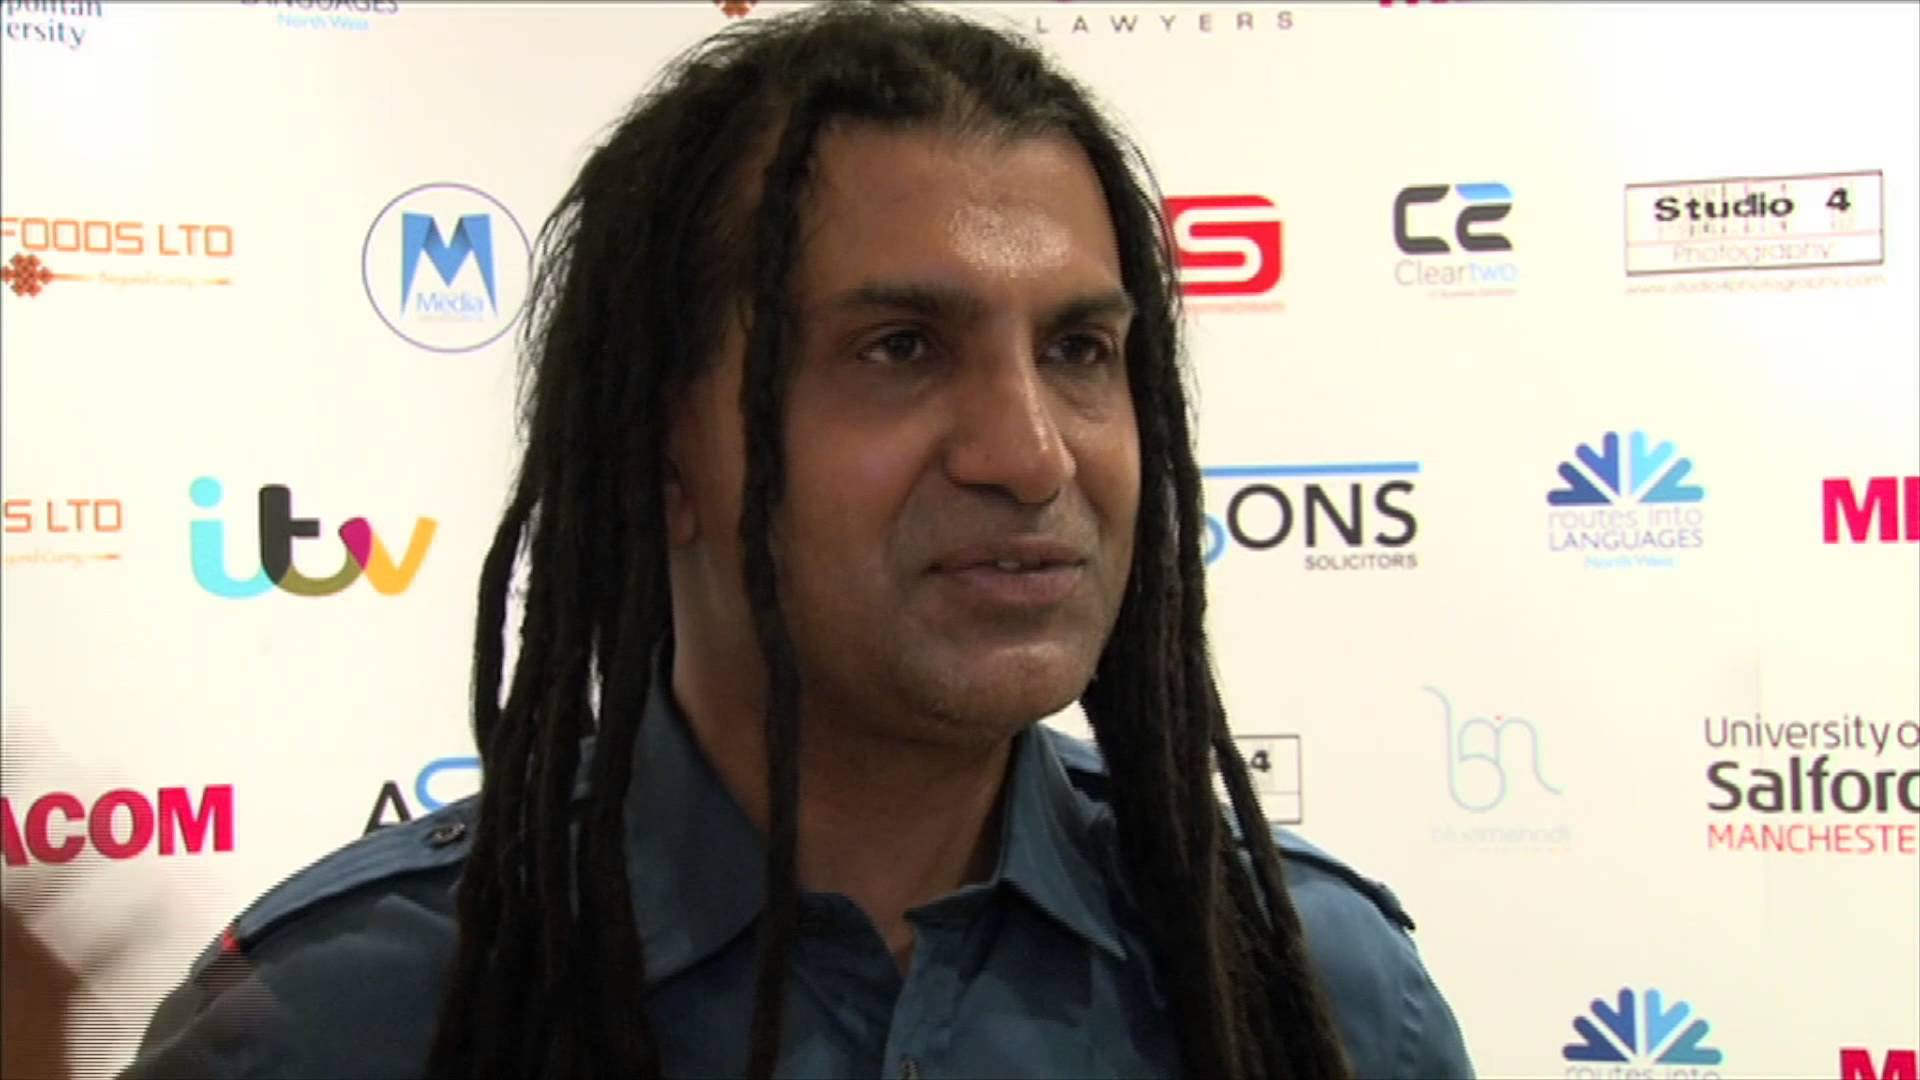 Apache Indian Looking Awesome